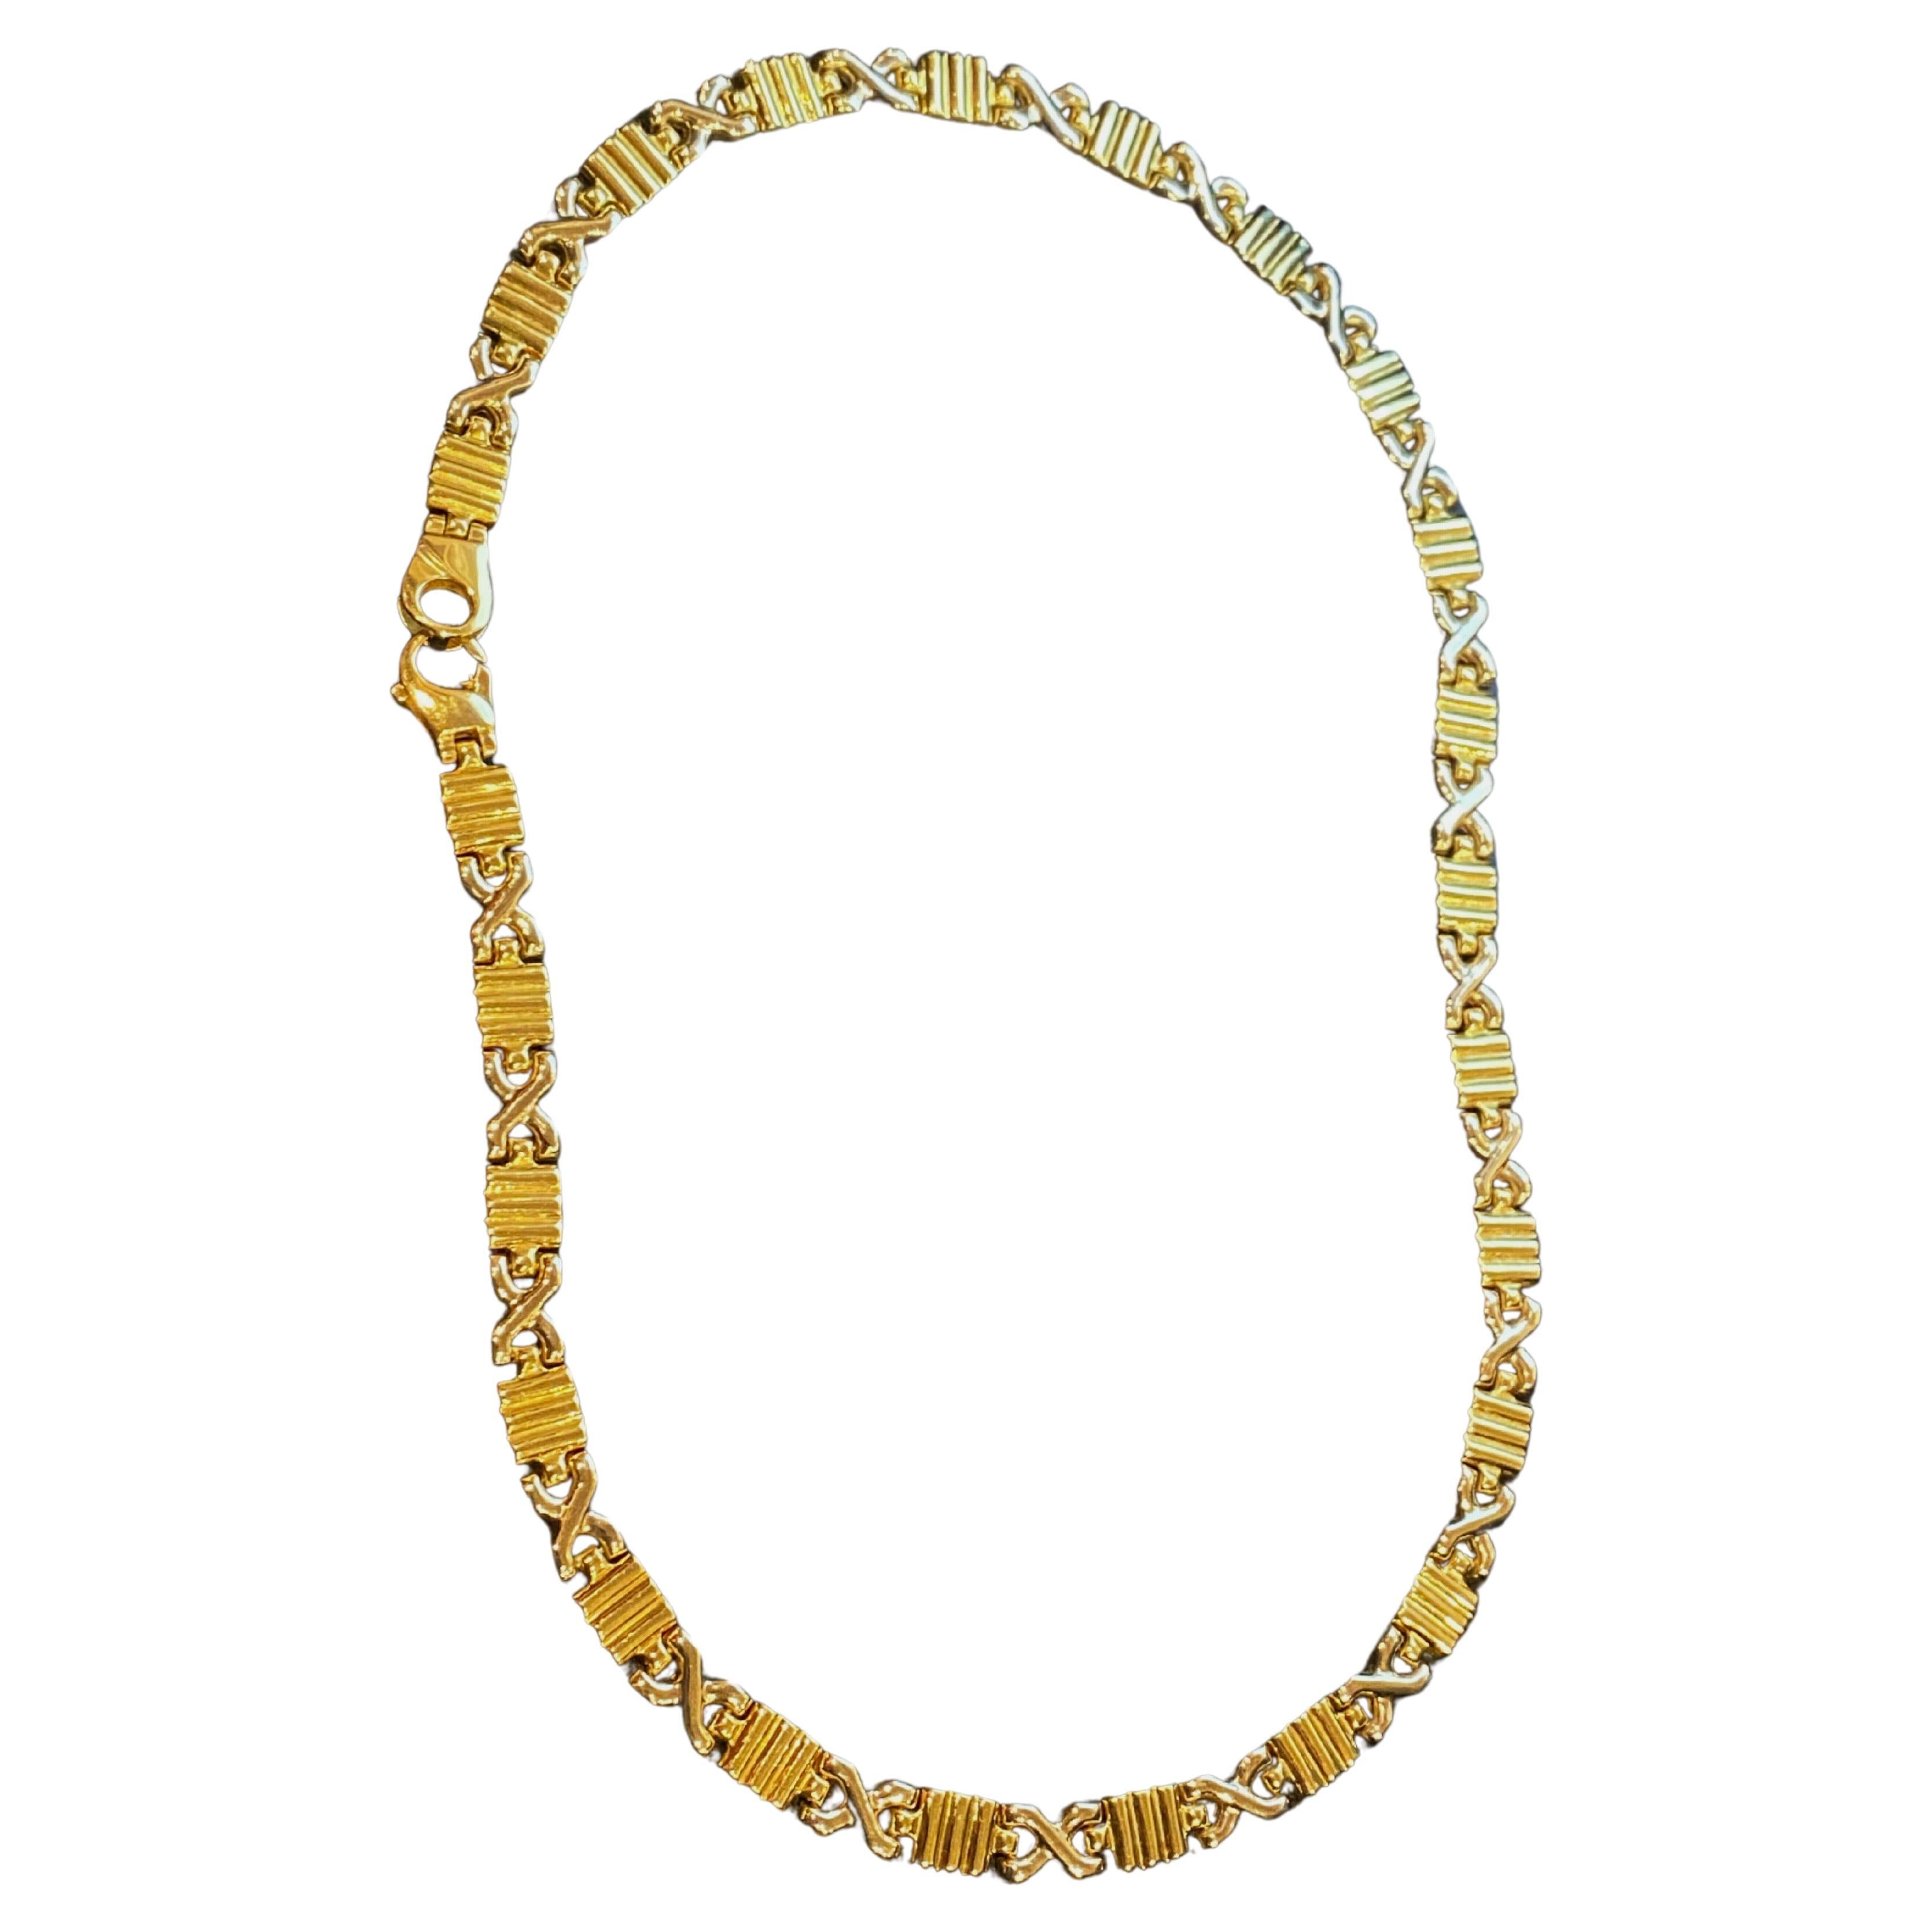 At comfortable length of 46cm, 
this necklace will add a touch of elegance to any outfit...

Of Italian provenance, 
the necklace is meticulously crafted in 18K white & yellow gold, 
bearing an 18K stamp & Italian hallmarks 

The chain necklace is